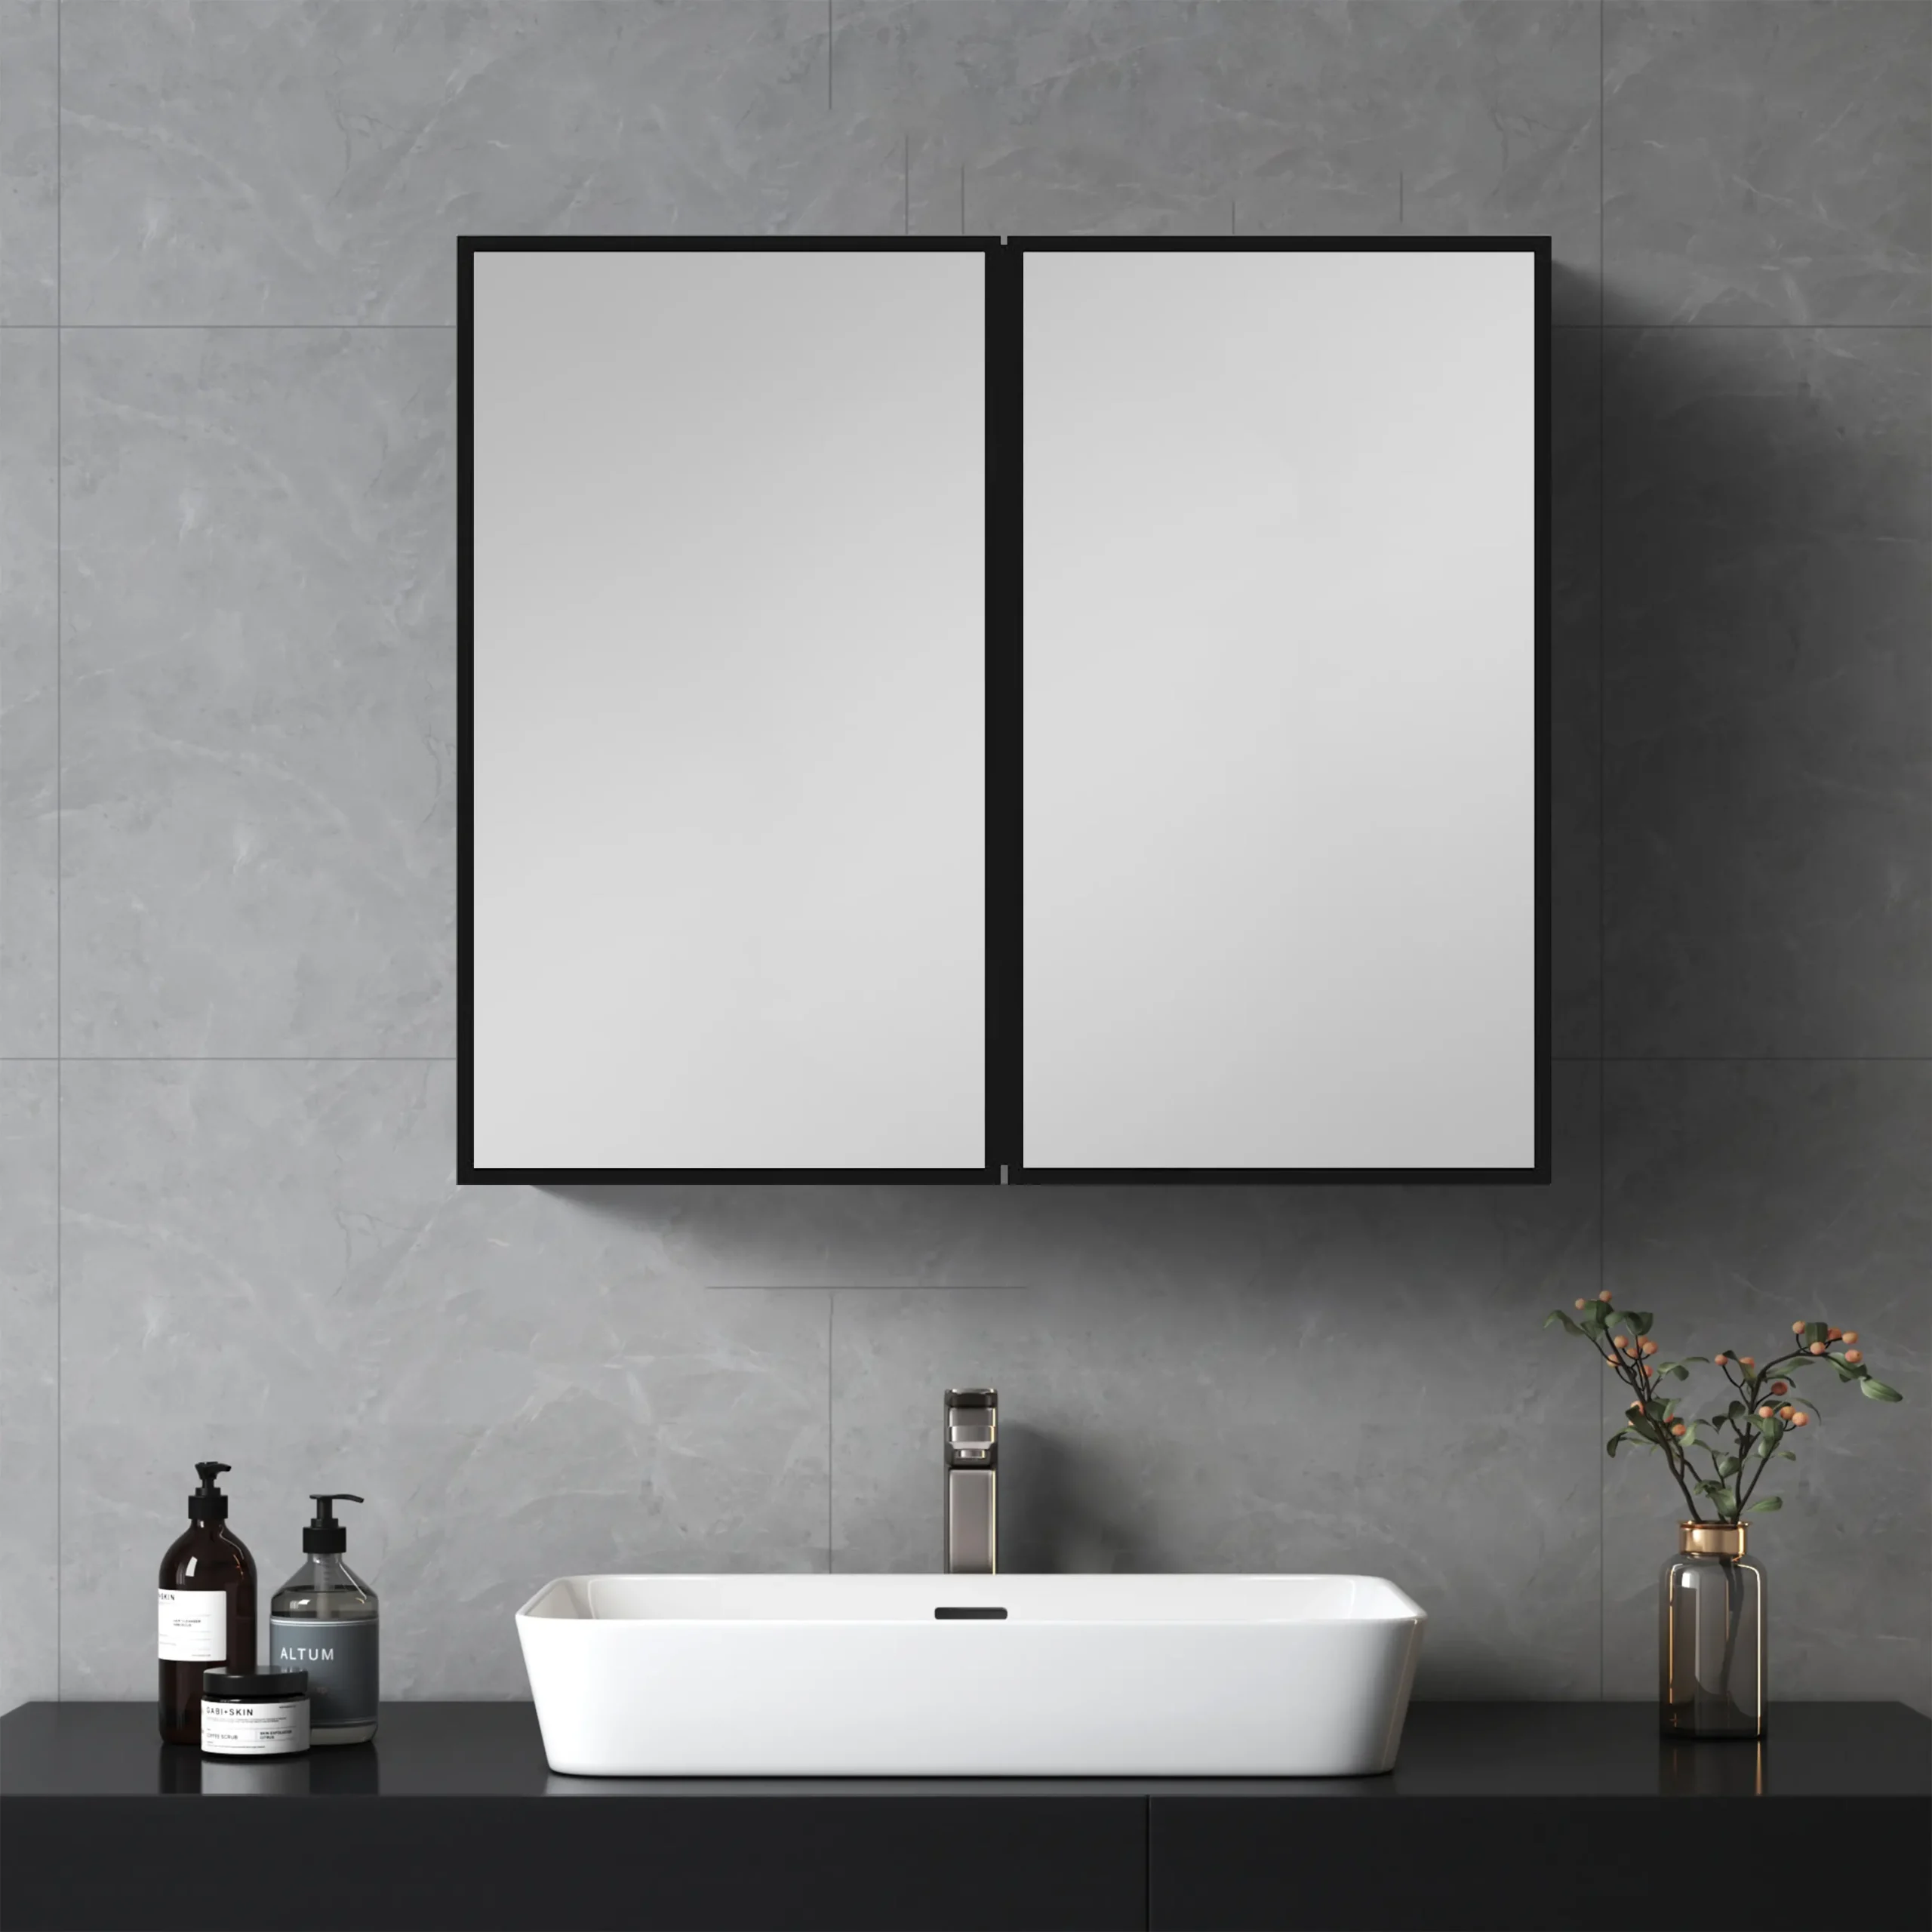 26*30 inches Black Metal Framed Wall mount or Recessed Bathroom Medicine Cabinet with Mirror